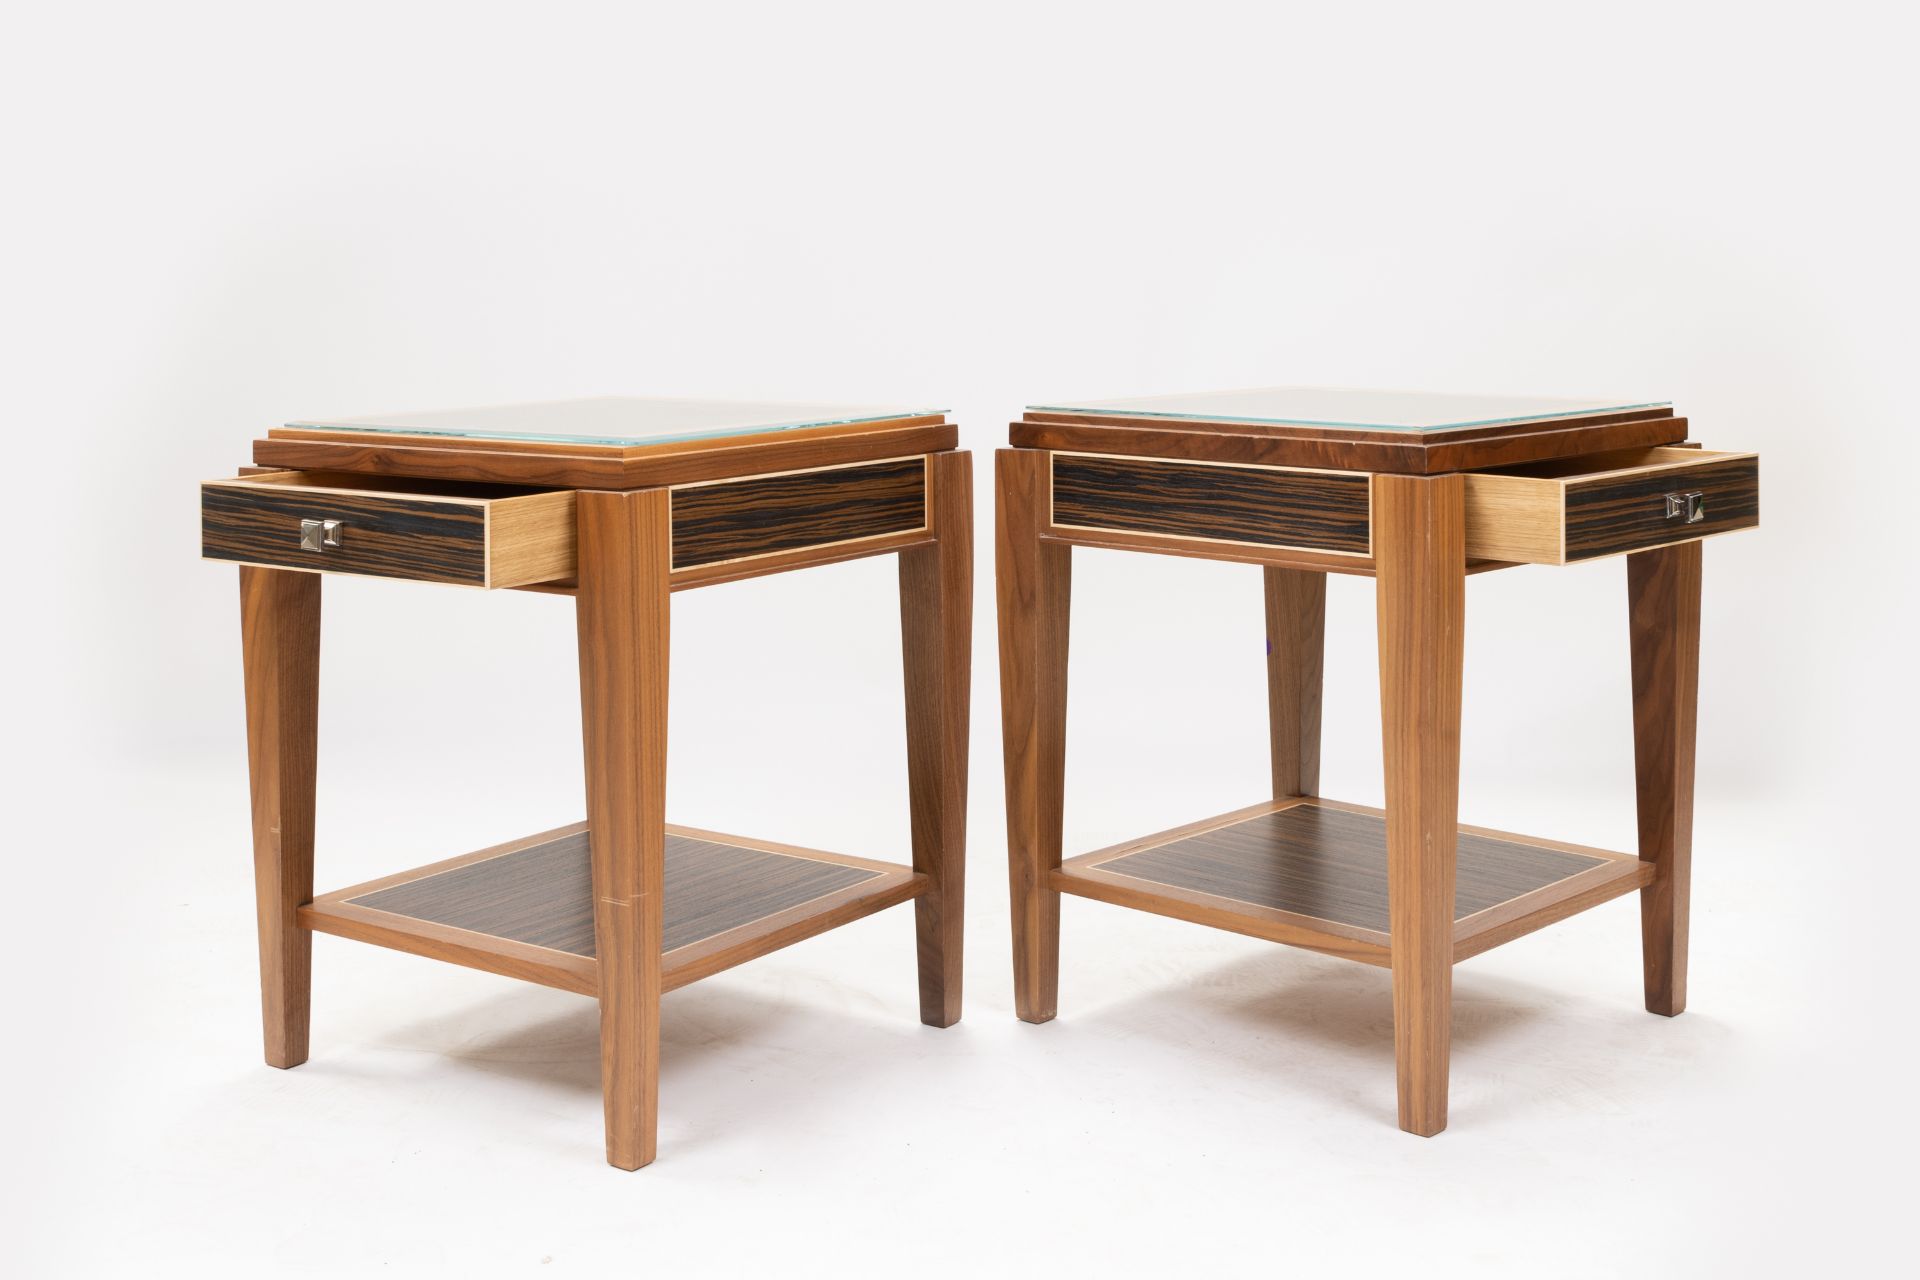 Bespoke Pair of David Linley Side Table for Claridge's - Image 3 of 5